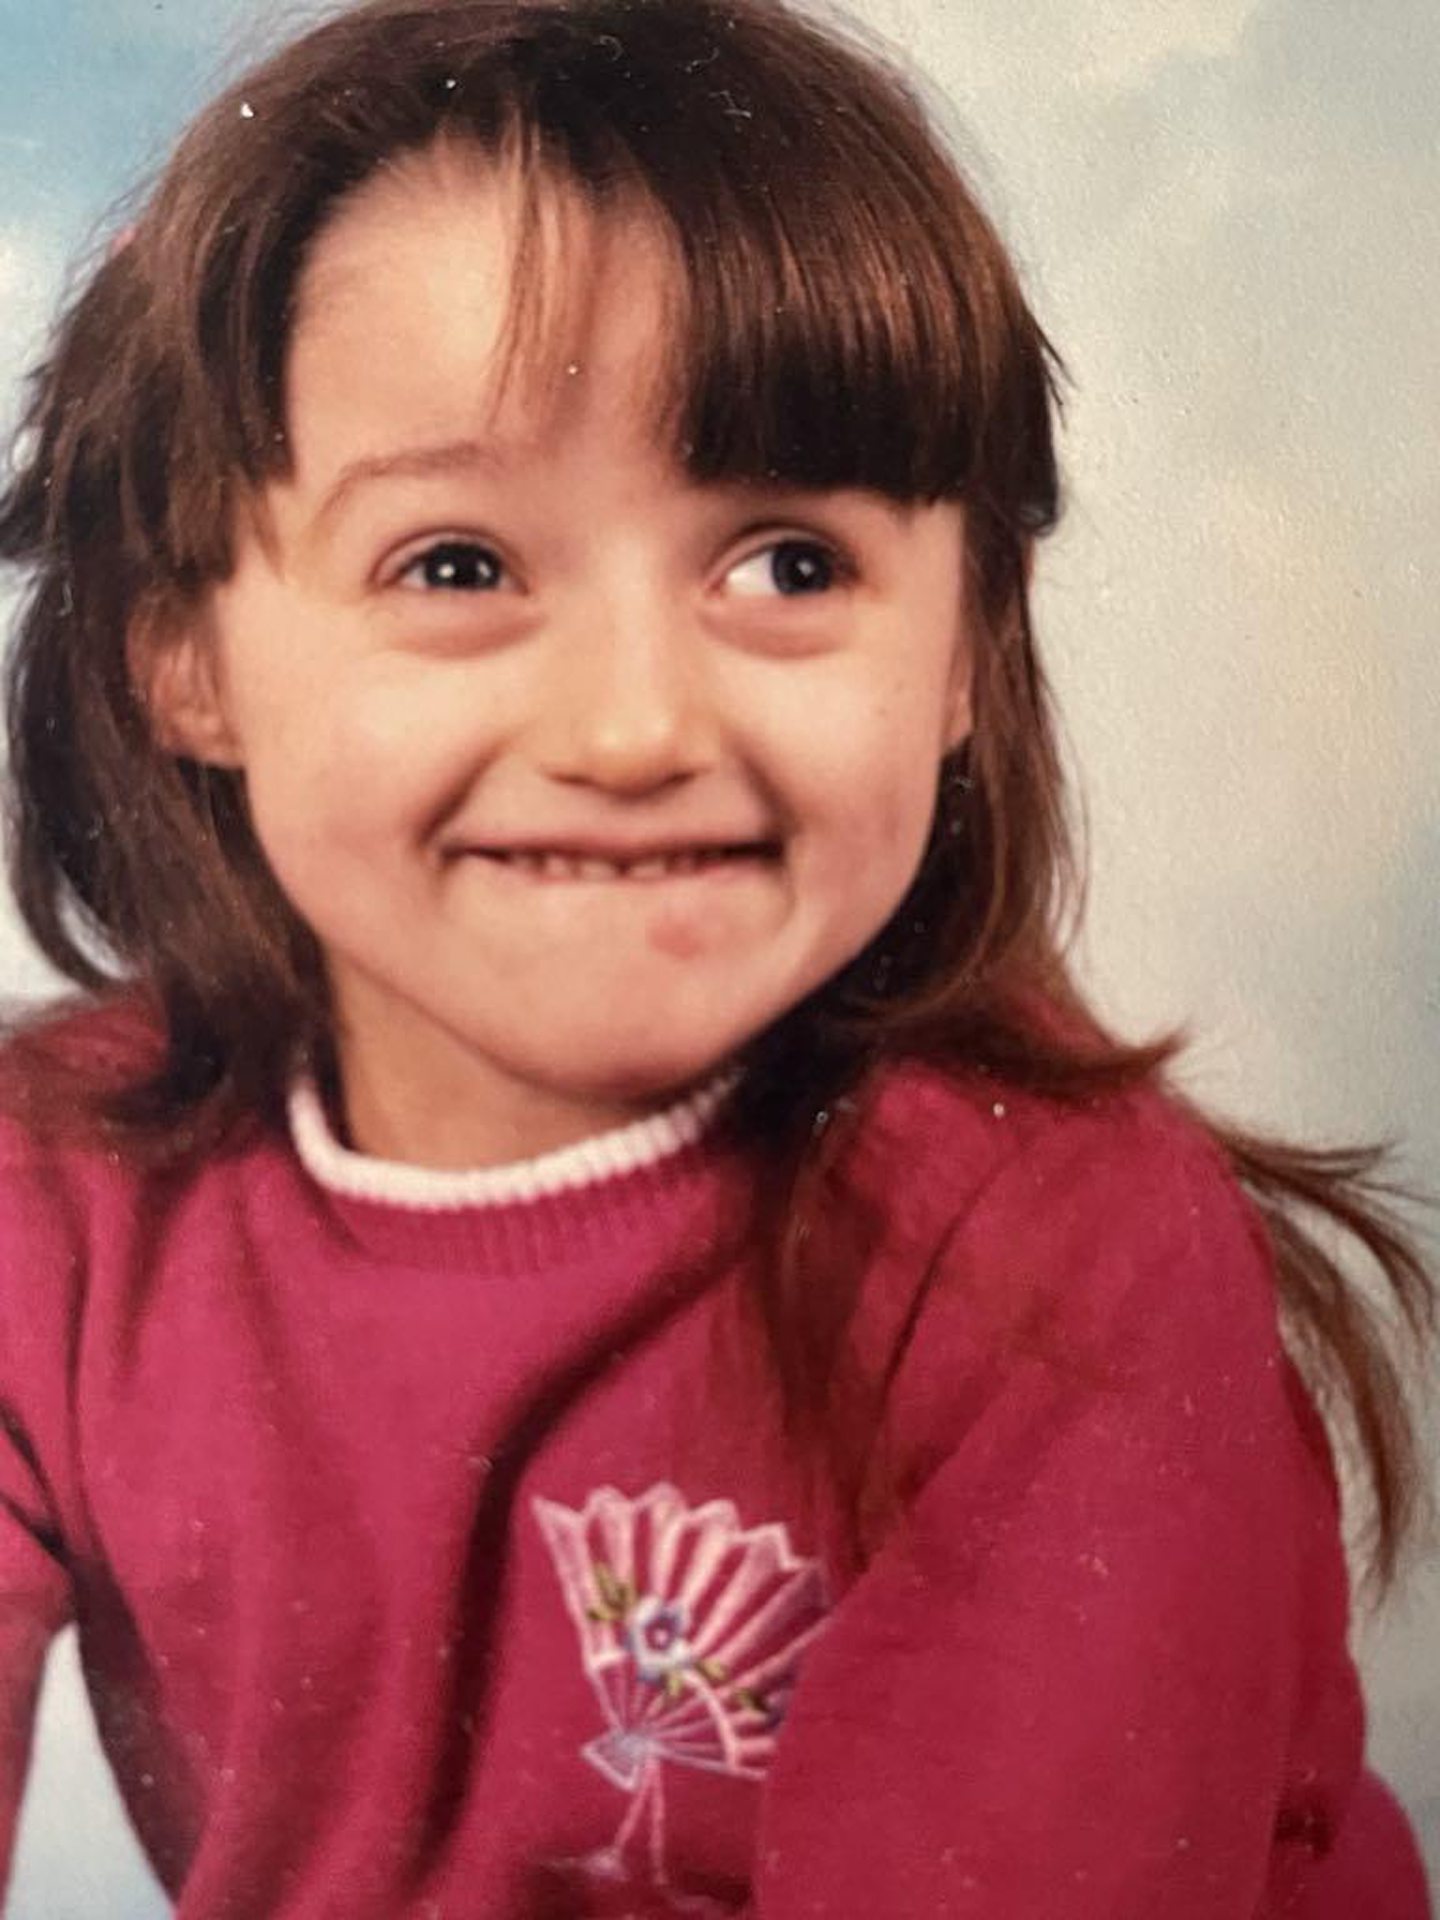 A picture of a smiling Becky as child.